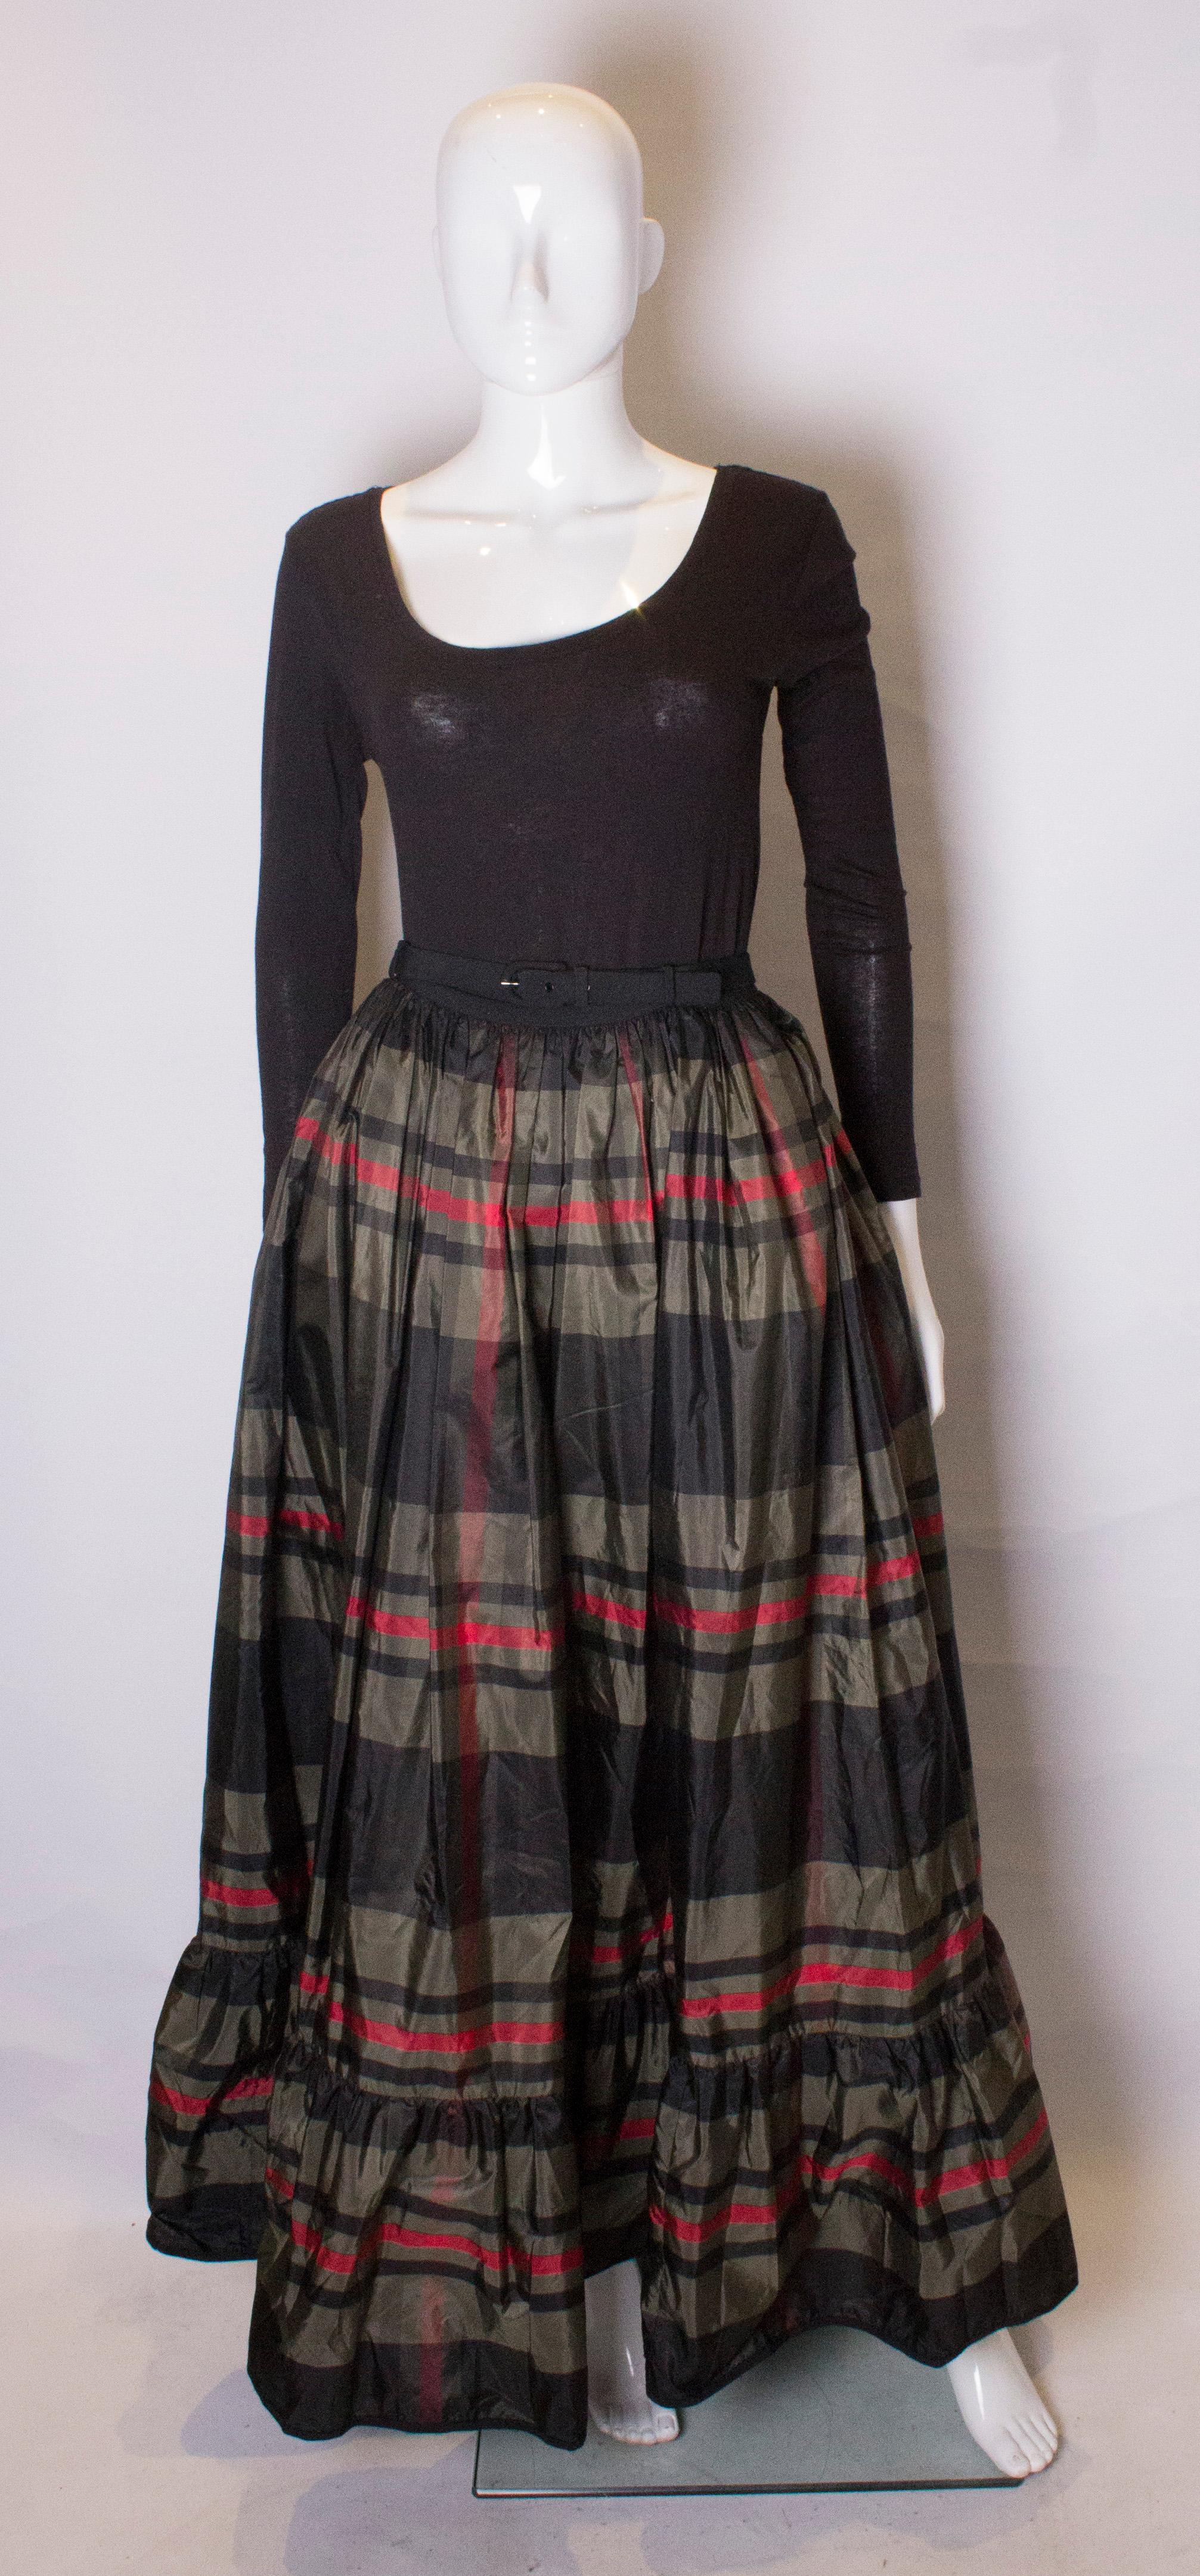 A great skirt for the festive season. This vintage silk Lanvin skirt , has a wonderful swish to it, with net under the frill to give it defnition. It has an olive green background with red and black check design. It has a matching